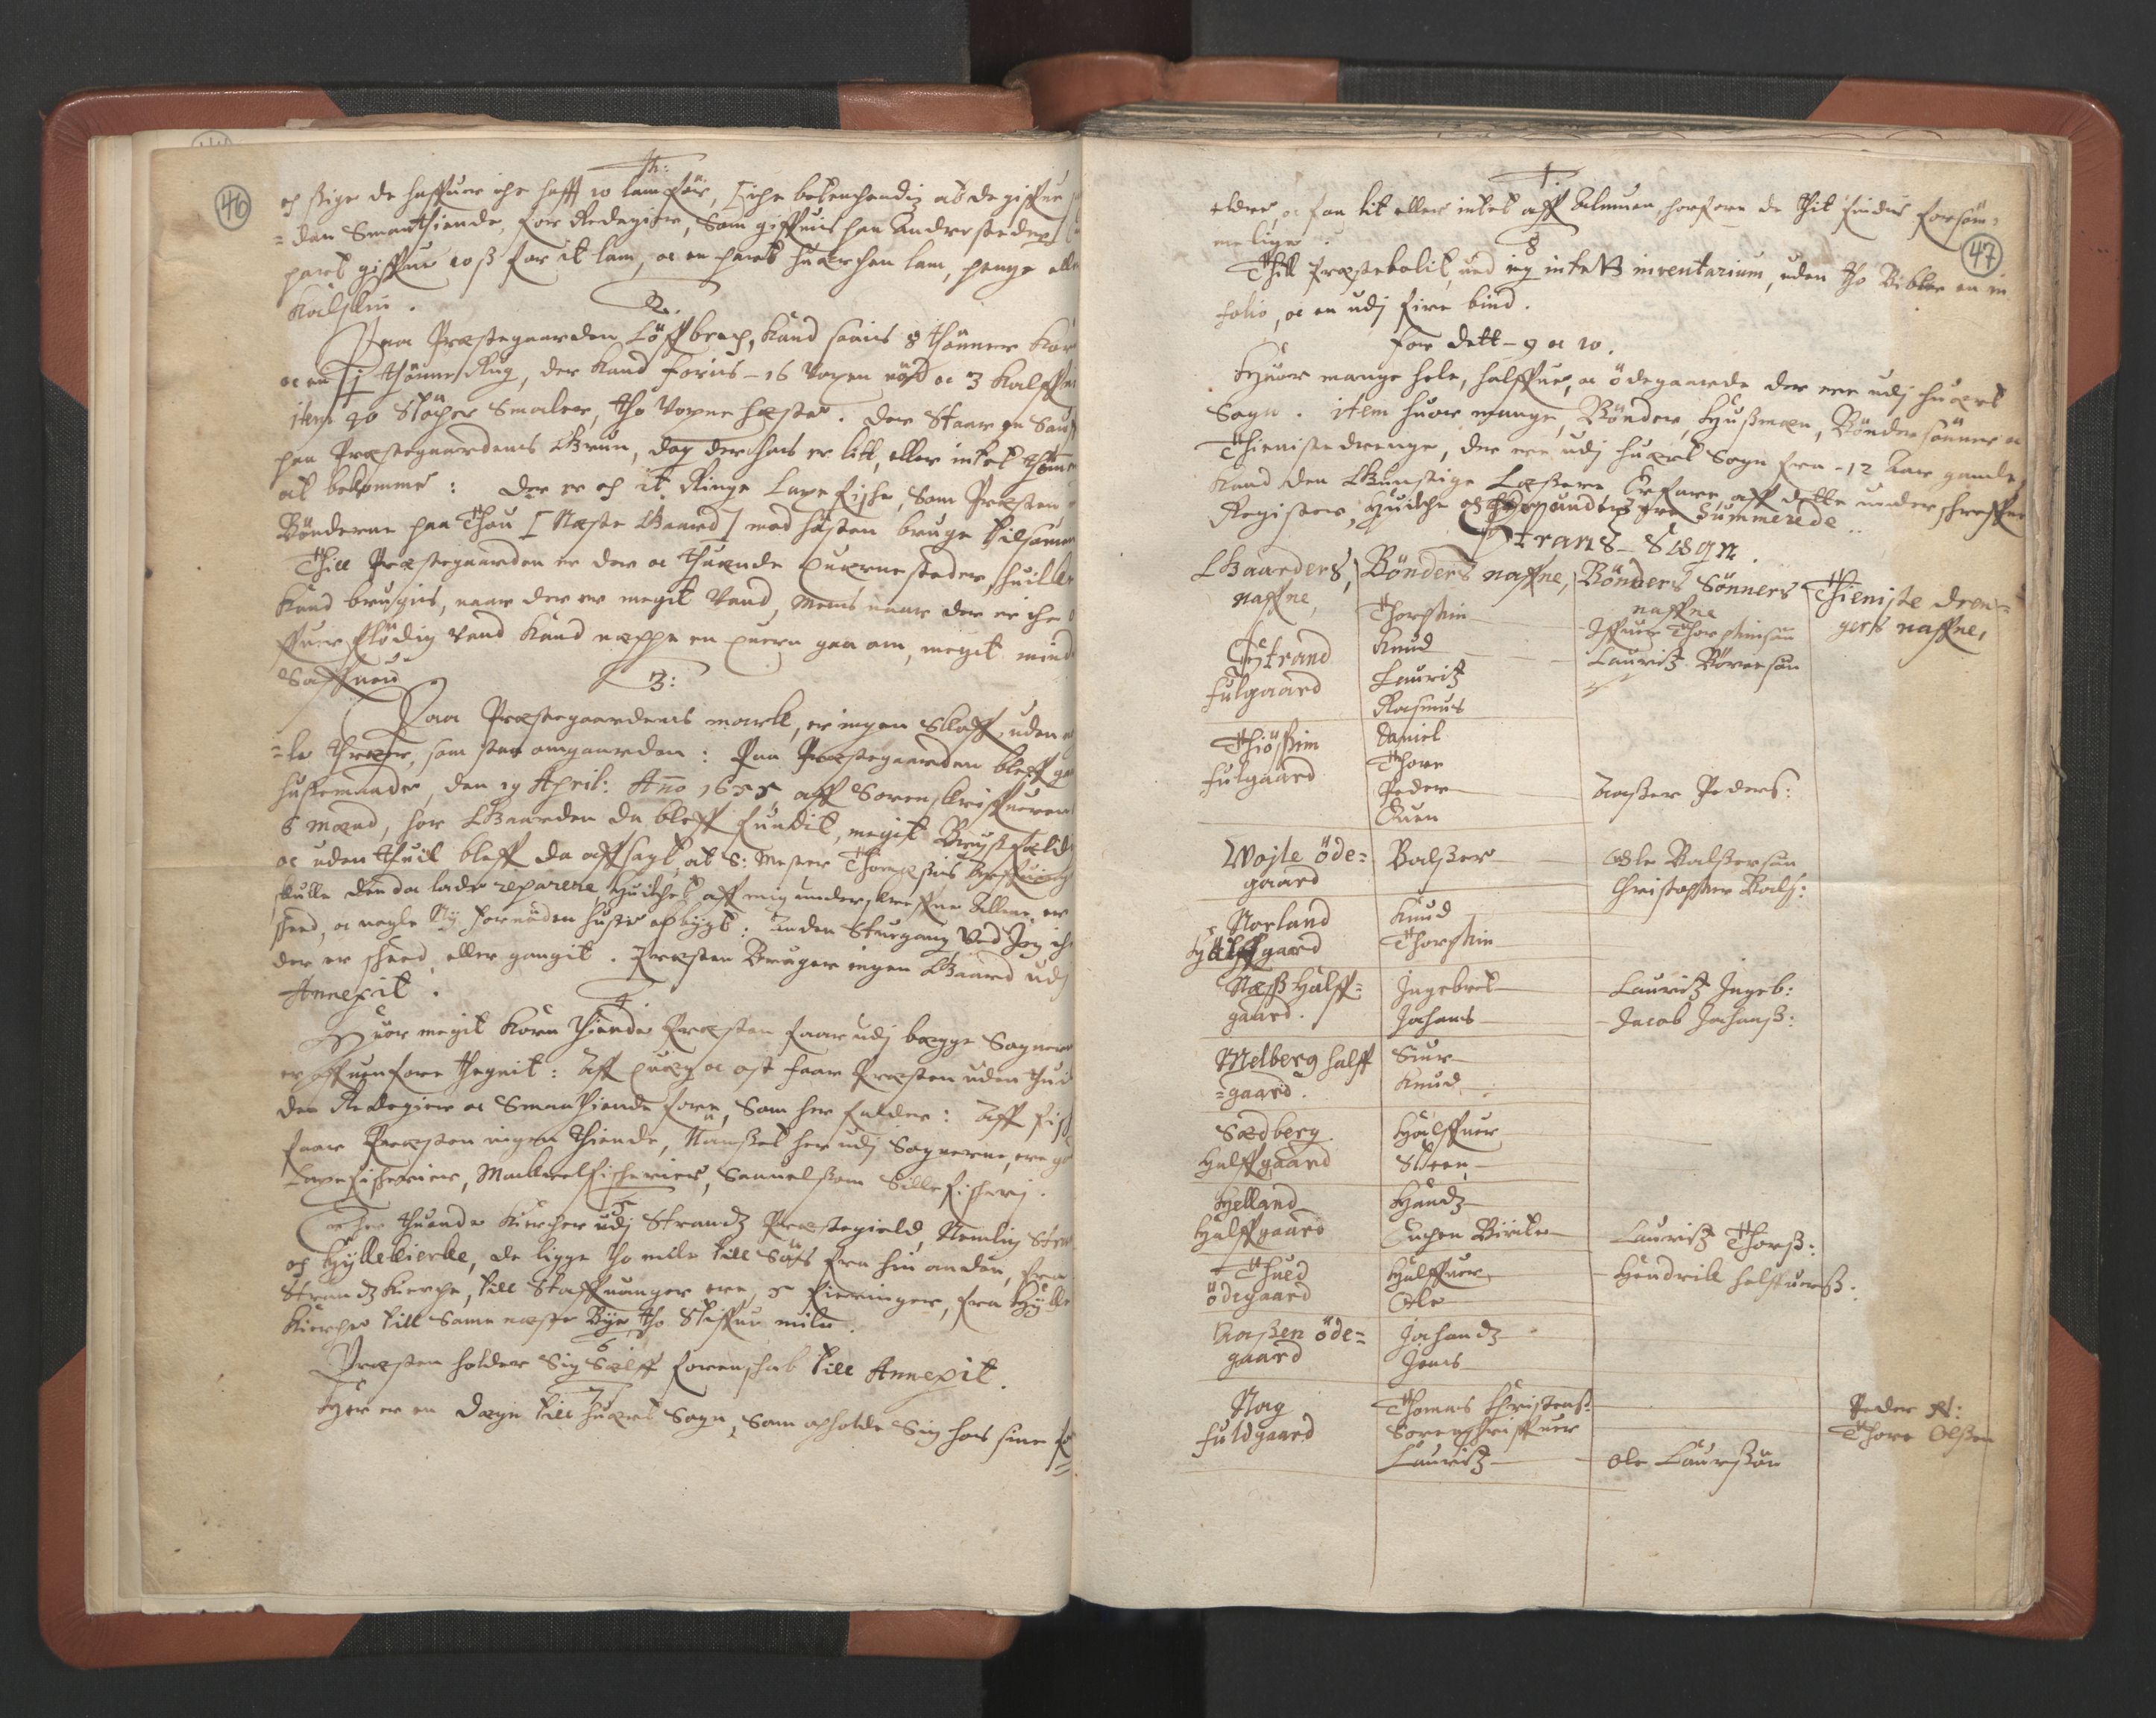 RA, Vicar's Census 1664-1666, no. 18: Stavanger deanery and Karmsund deanery, 1664-1666, p. 46-47